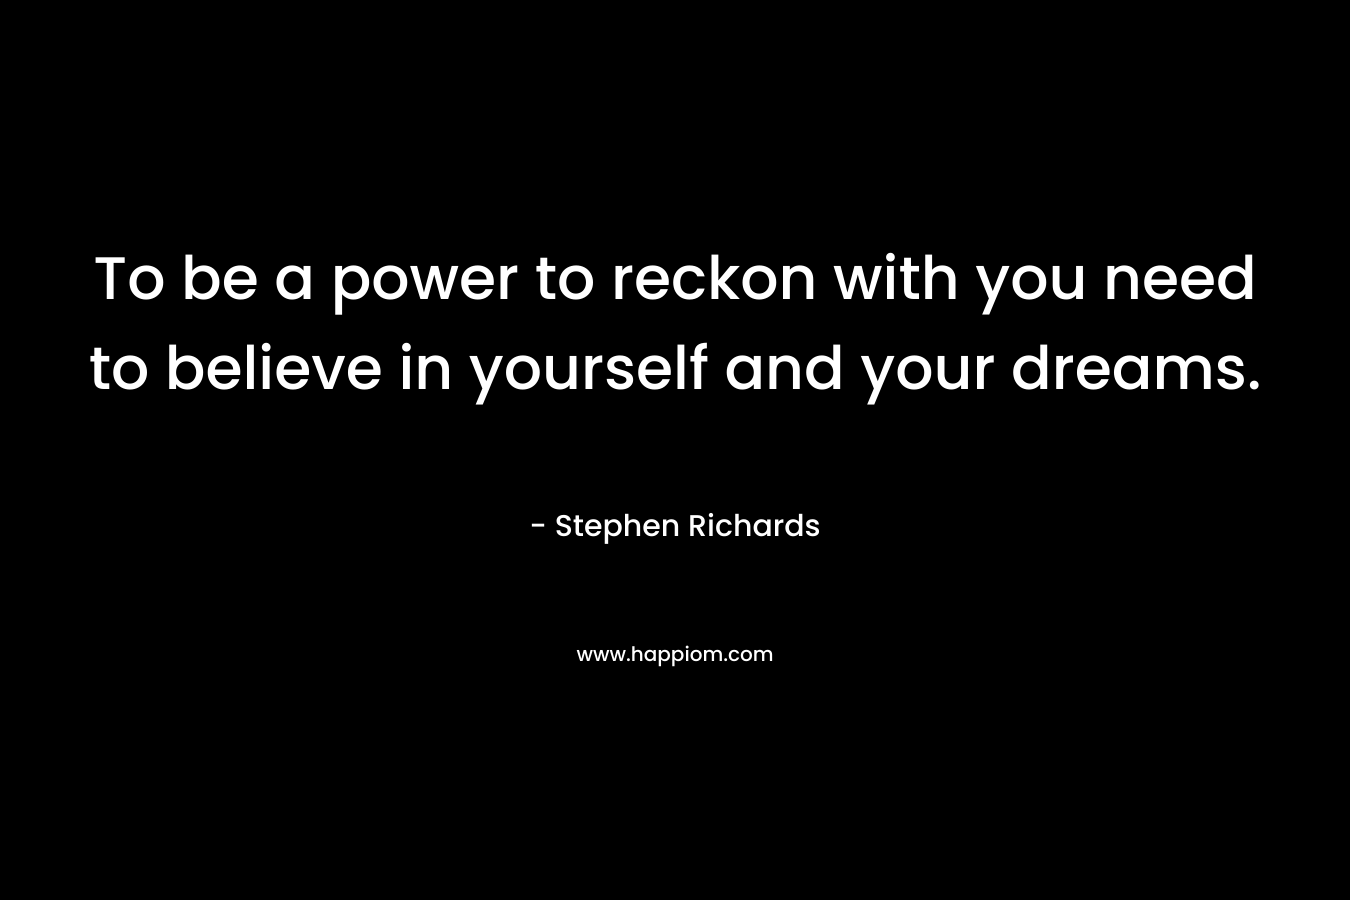 To be a power to reckon with you need to believe in yourself and your dreams. – Stephen Richards